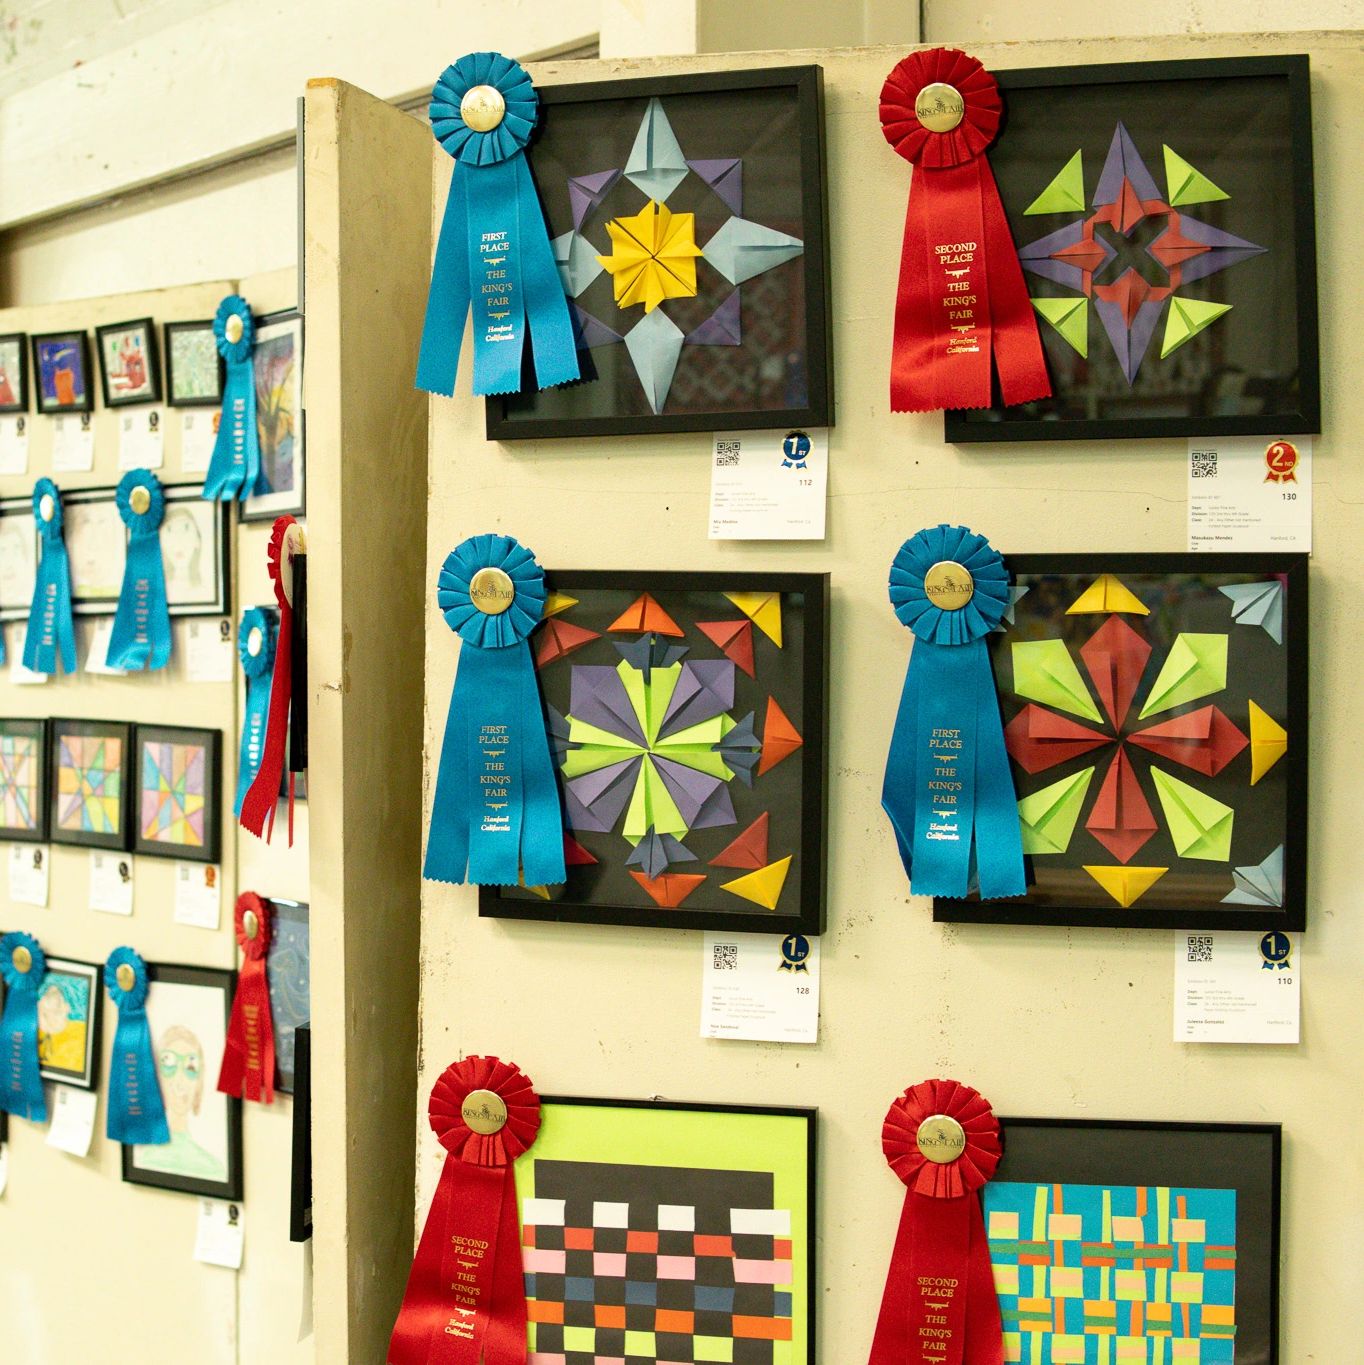 Image of paper crafts with blue & red ribbons displayed